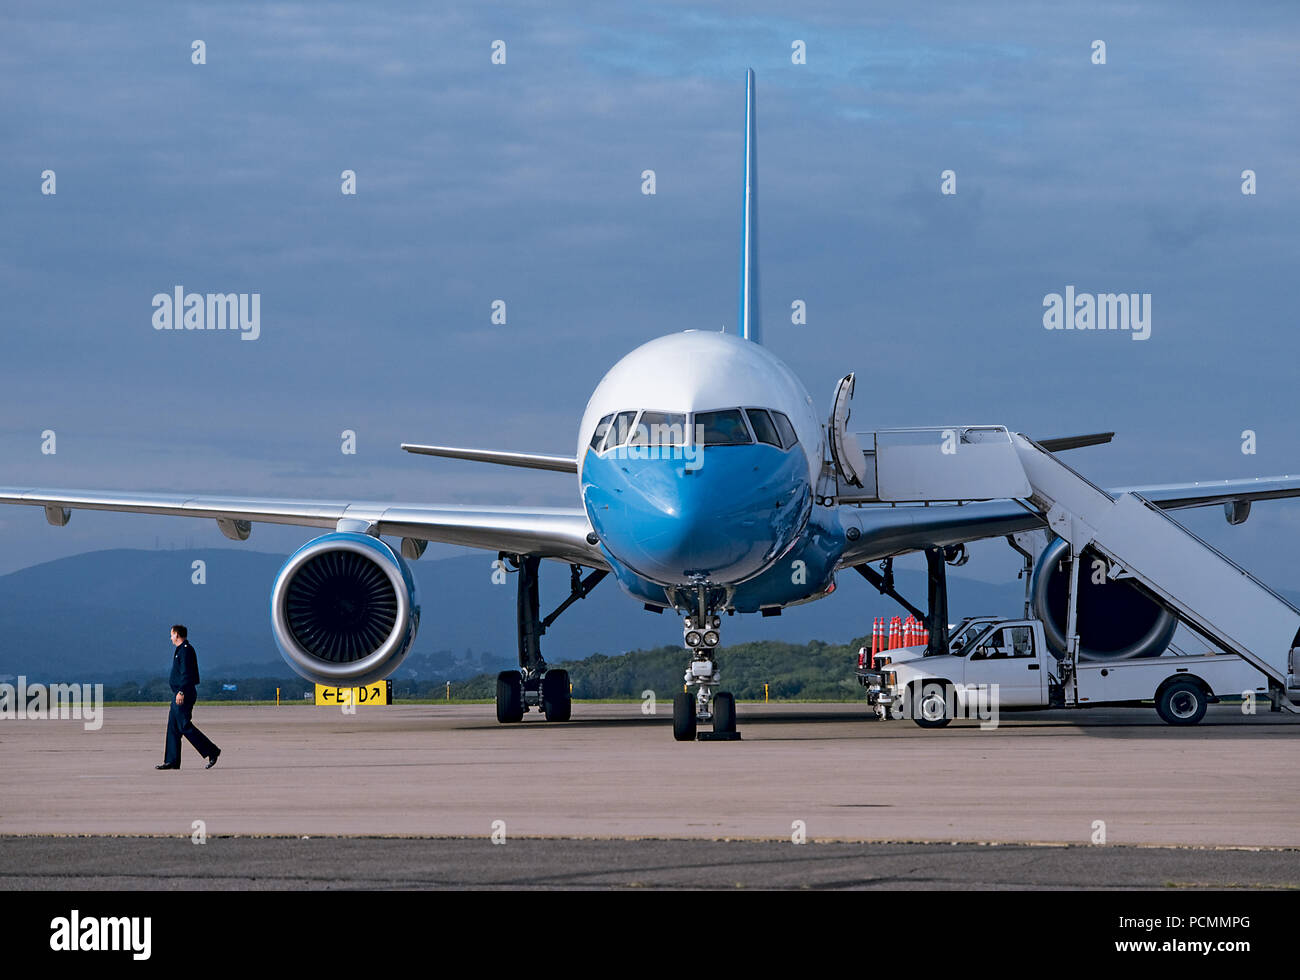 Pennsylvania, USA. 2nd Aug 2018. 'Air Force One' waits at AVP Airport While President Trump Conducts Rally at Wilkes-Barre, Pennsylvania, on August 2, 2018 Credit: Pixel Power/Alamy Live News Stock Photo